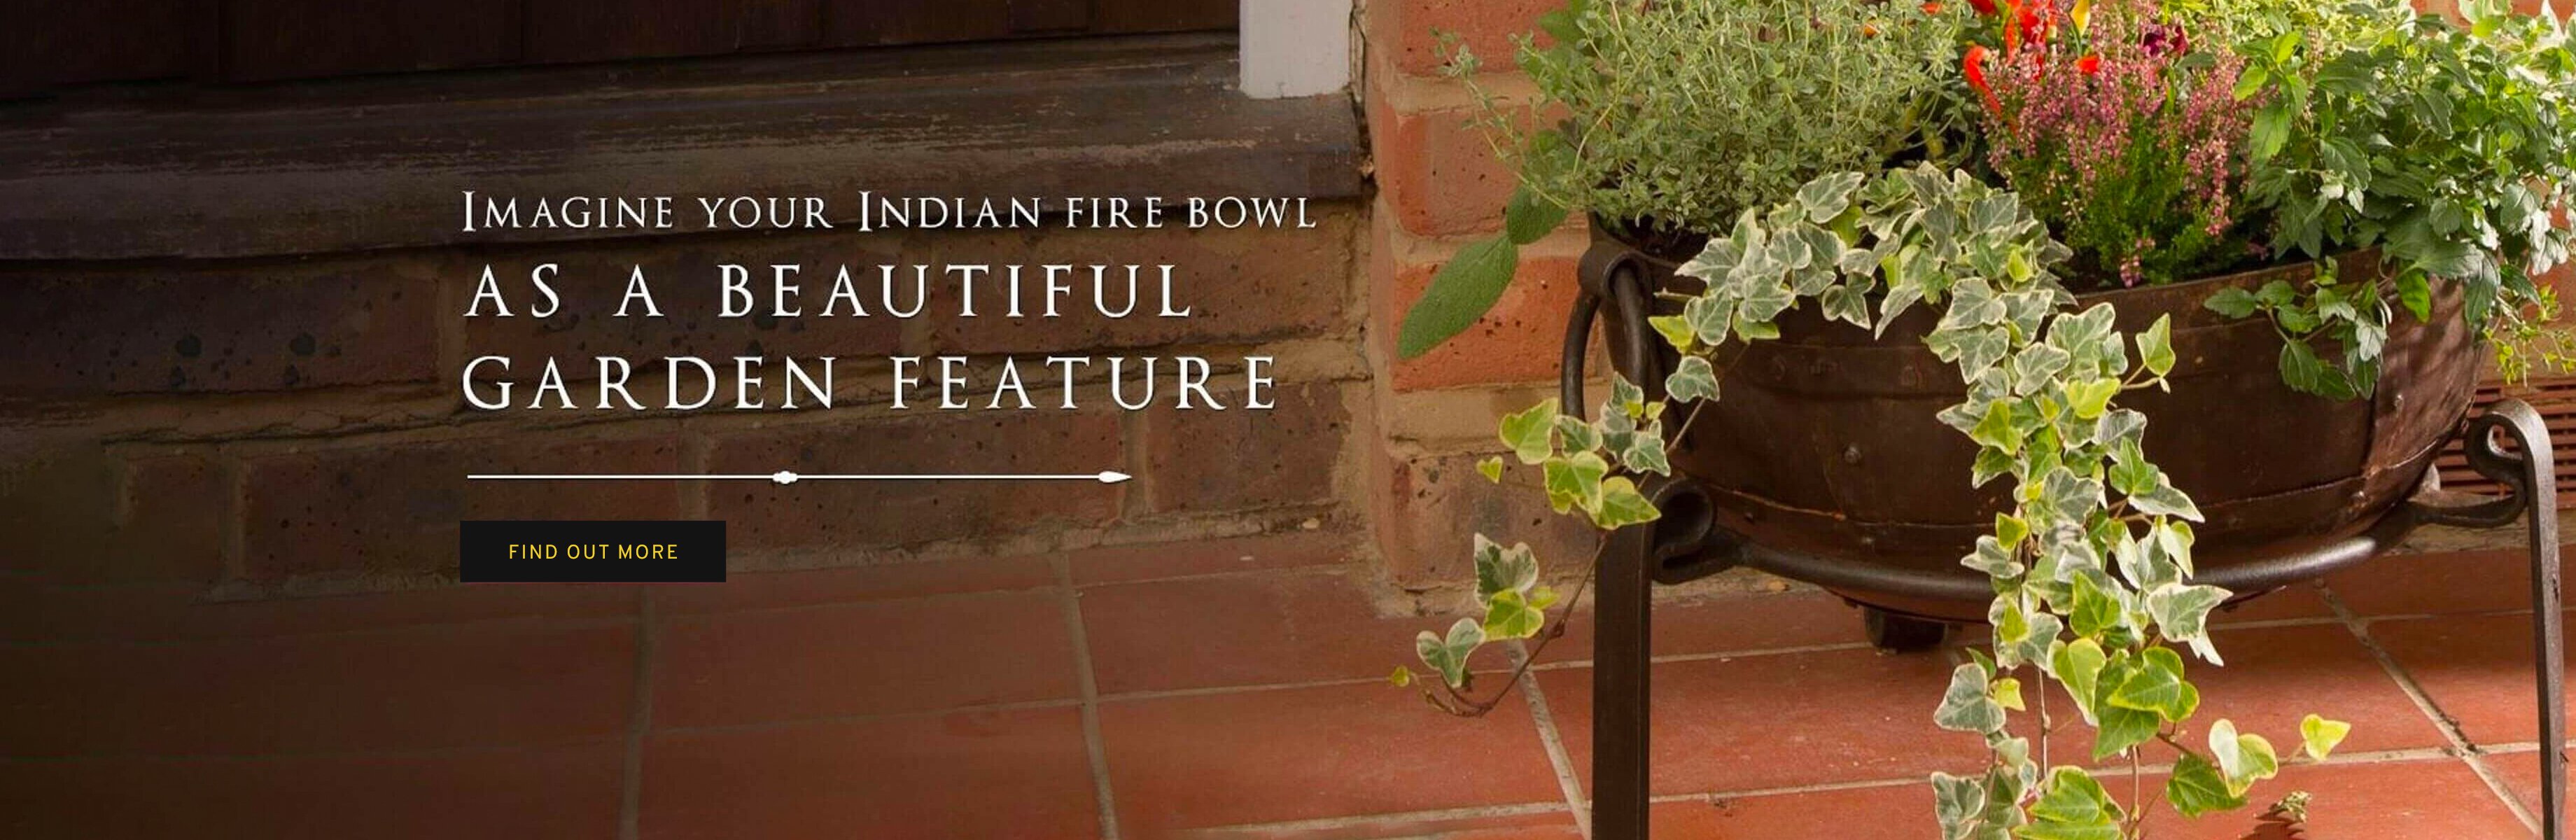 Recycled Indian Fire Bowls